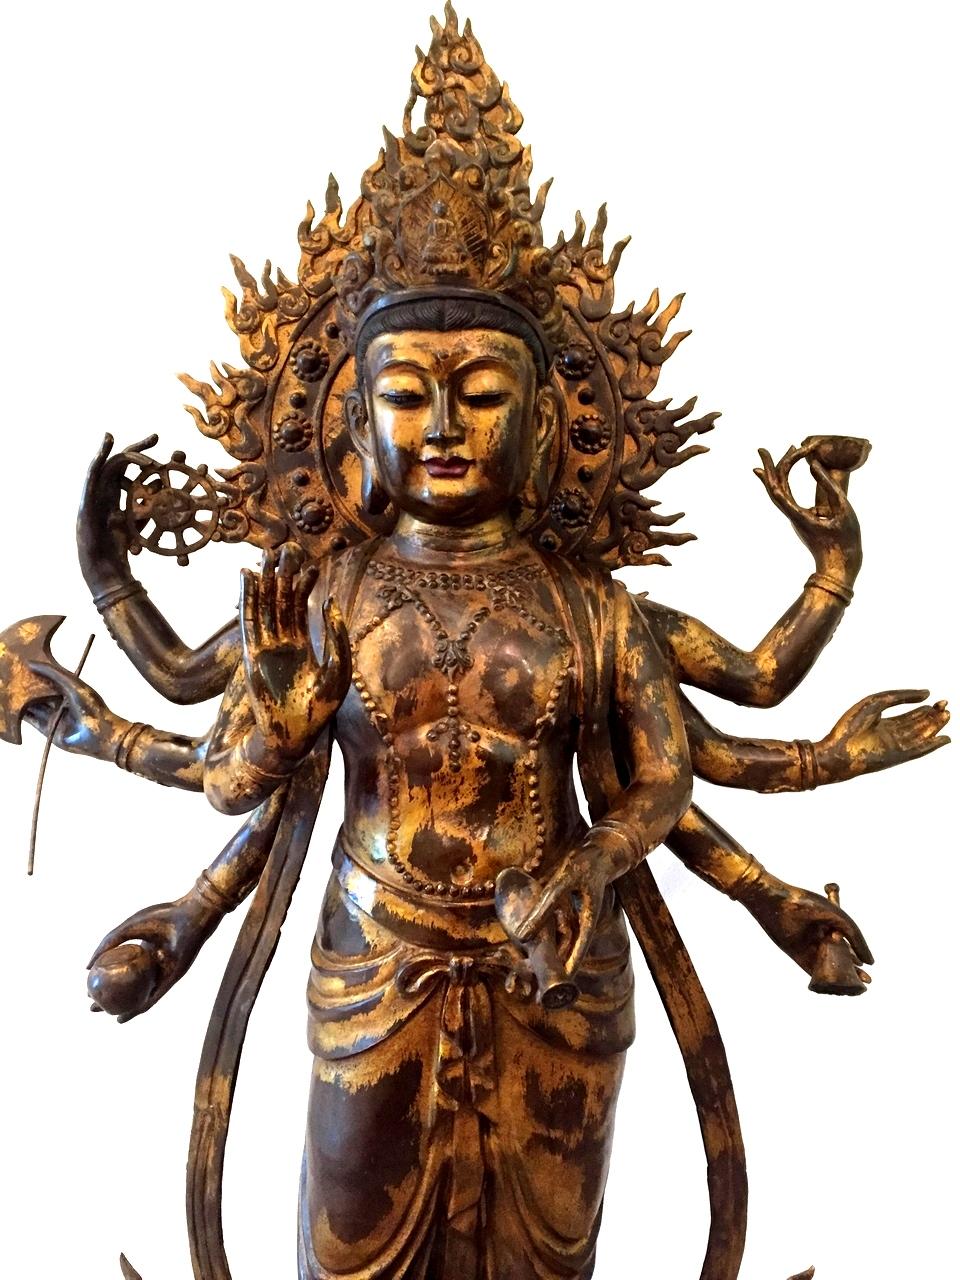 An exquisite bronze Multiple Armed Avalokitesvara Guan Yin statue. The 7-armed Goddess stands on double lotus throne, hands holding ritual objects including a lotus, mala pearl, ceremonial dagger, ambrosia vase, and Wheel of Law. Her broad Tang